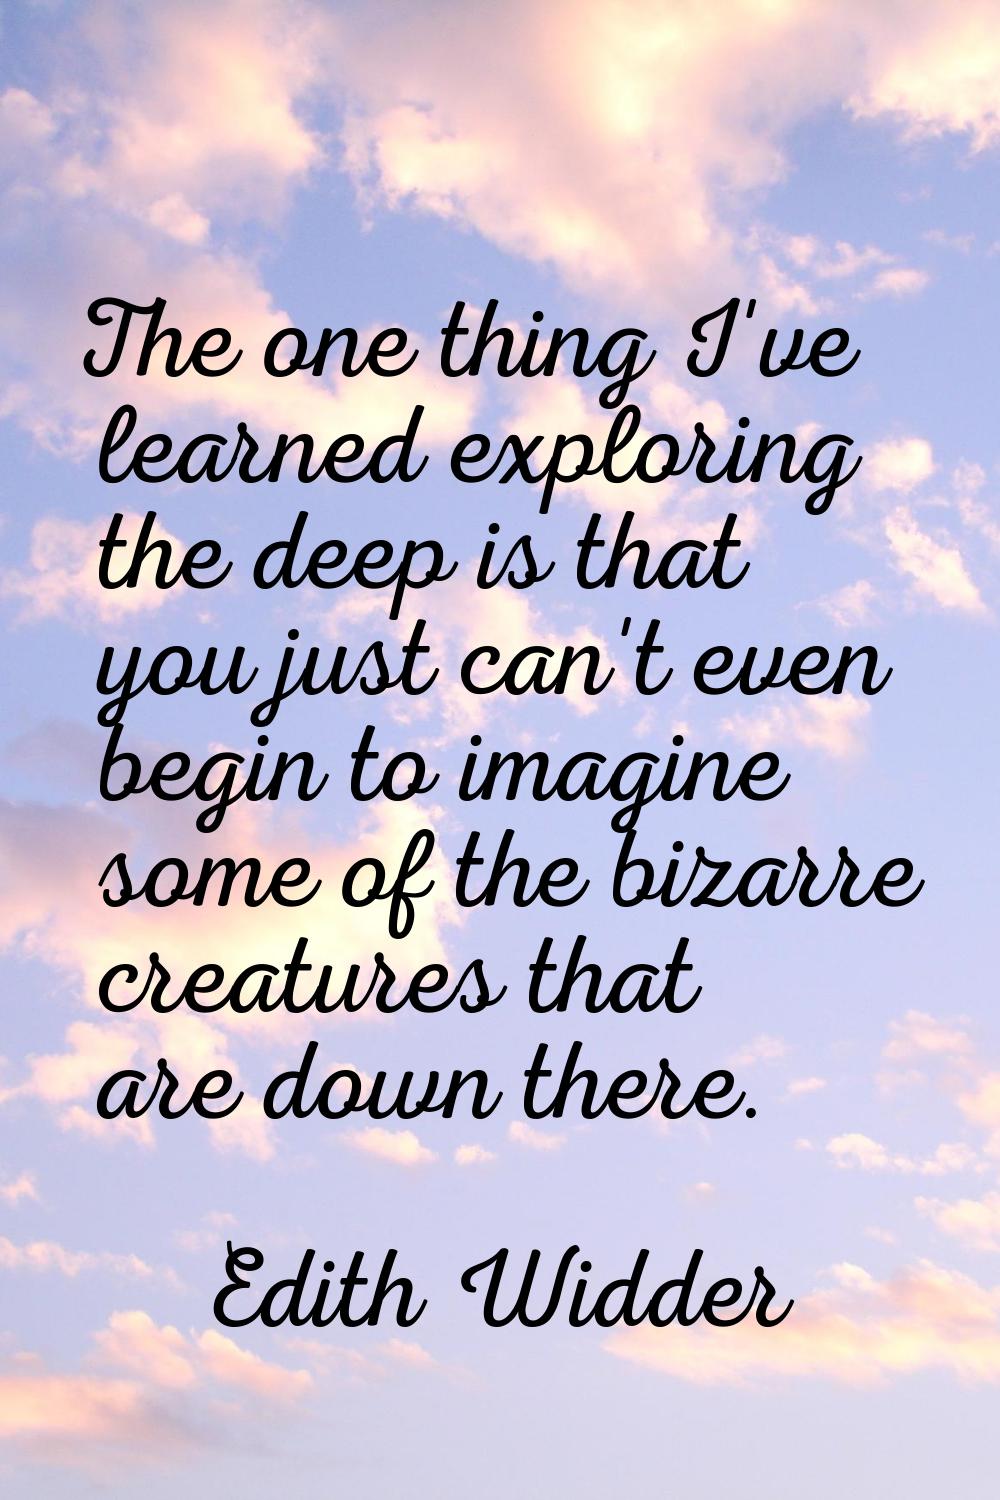 The one thing I've learned exploring the deep is that you just can't even begin to imagine some of 